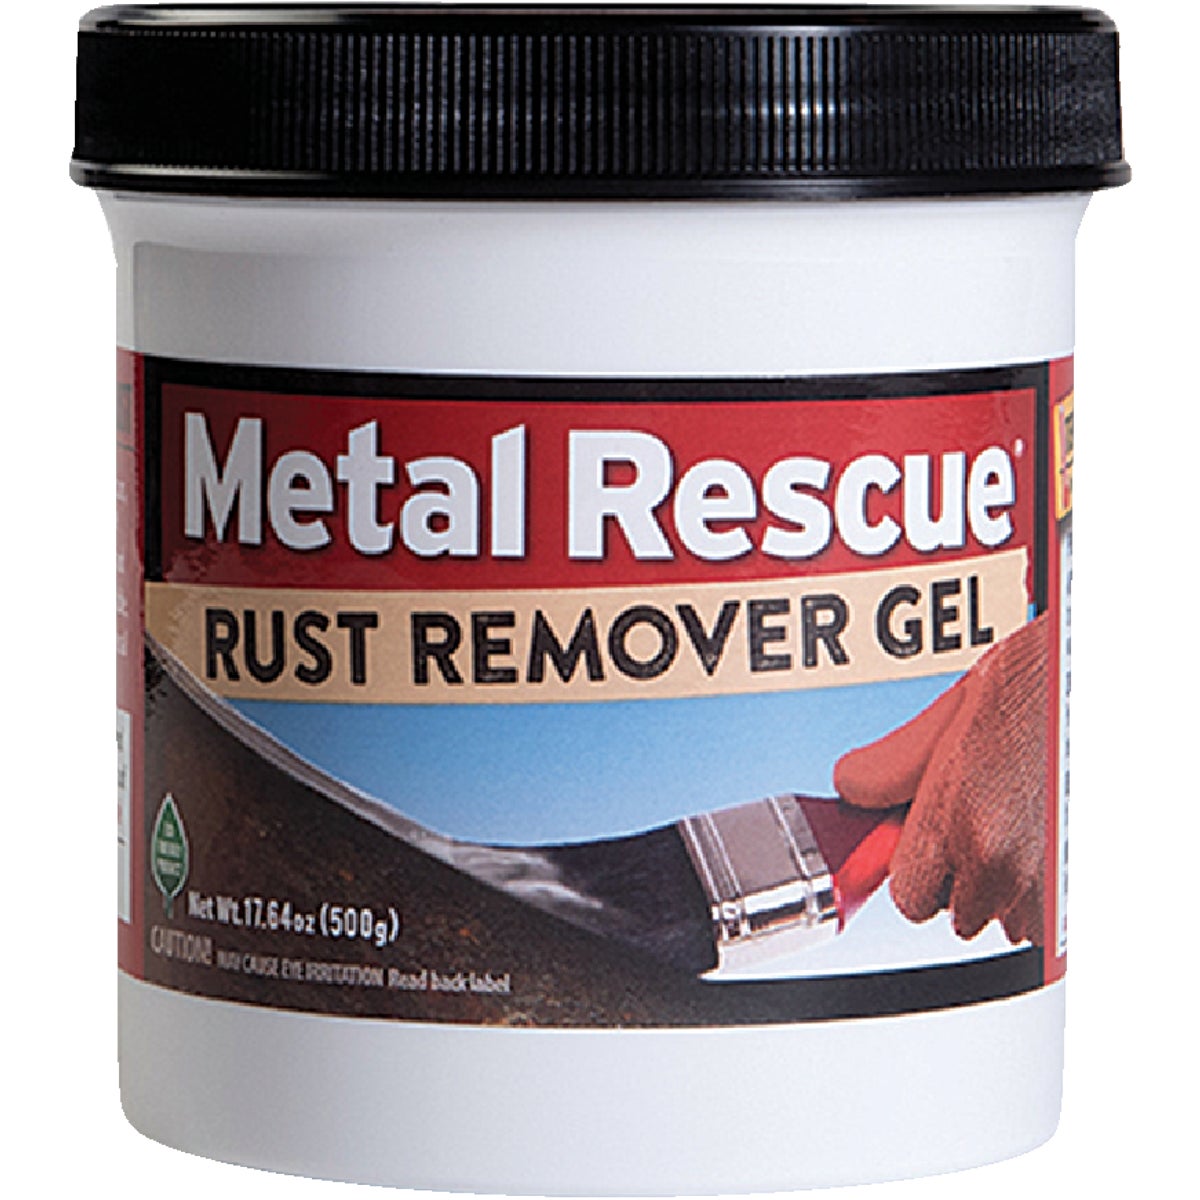 Item 771909, Rust remover gel is a cleaner, safer, and easier rust remover for iron and 